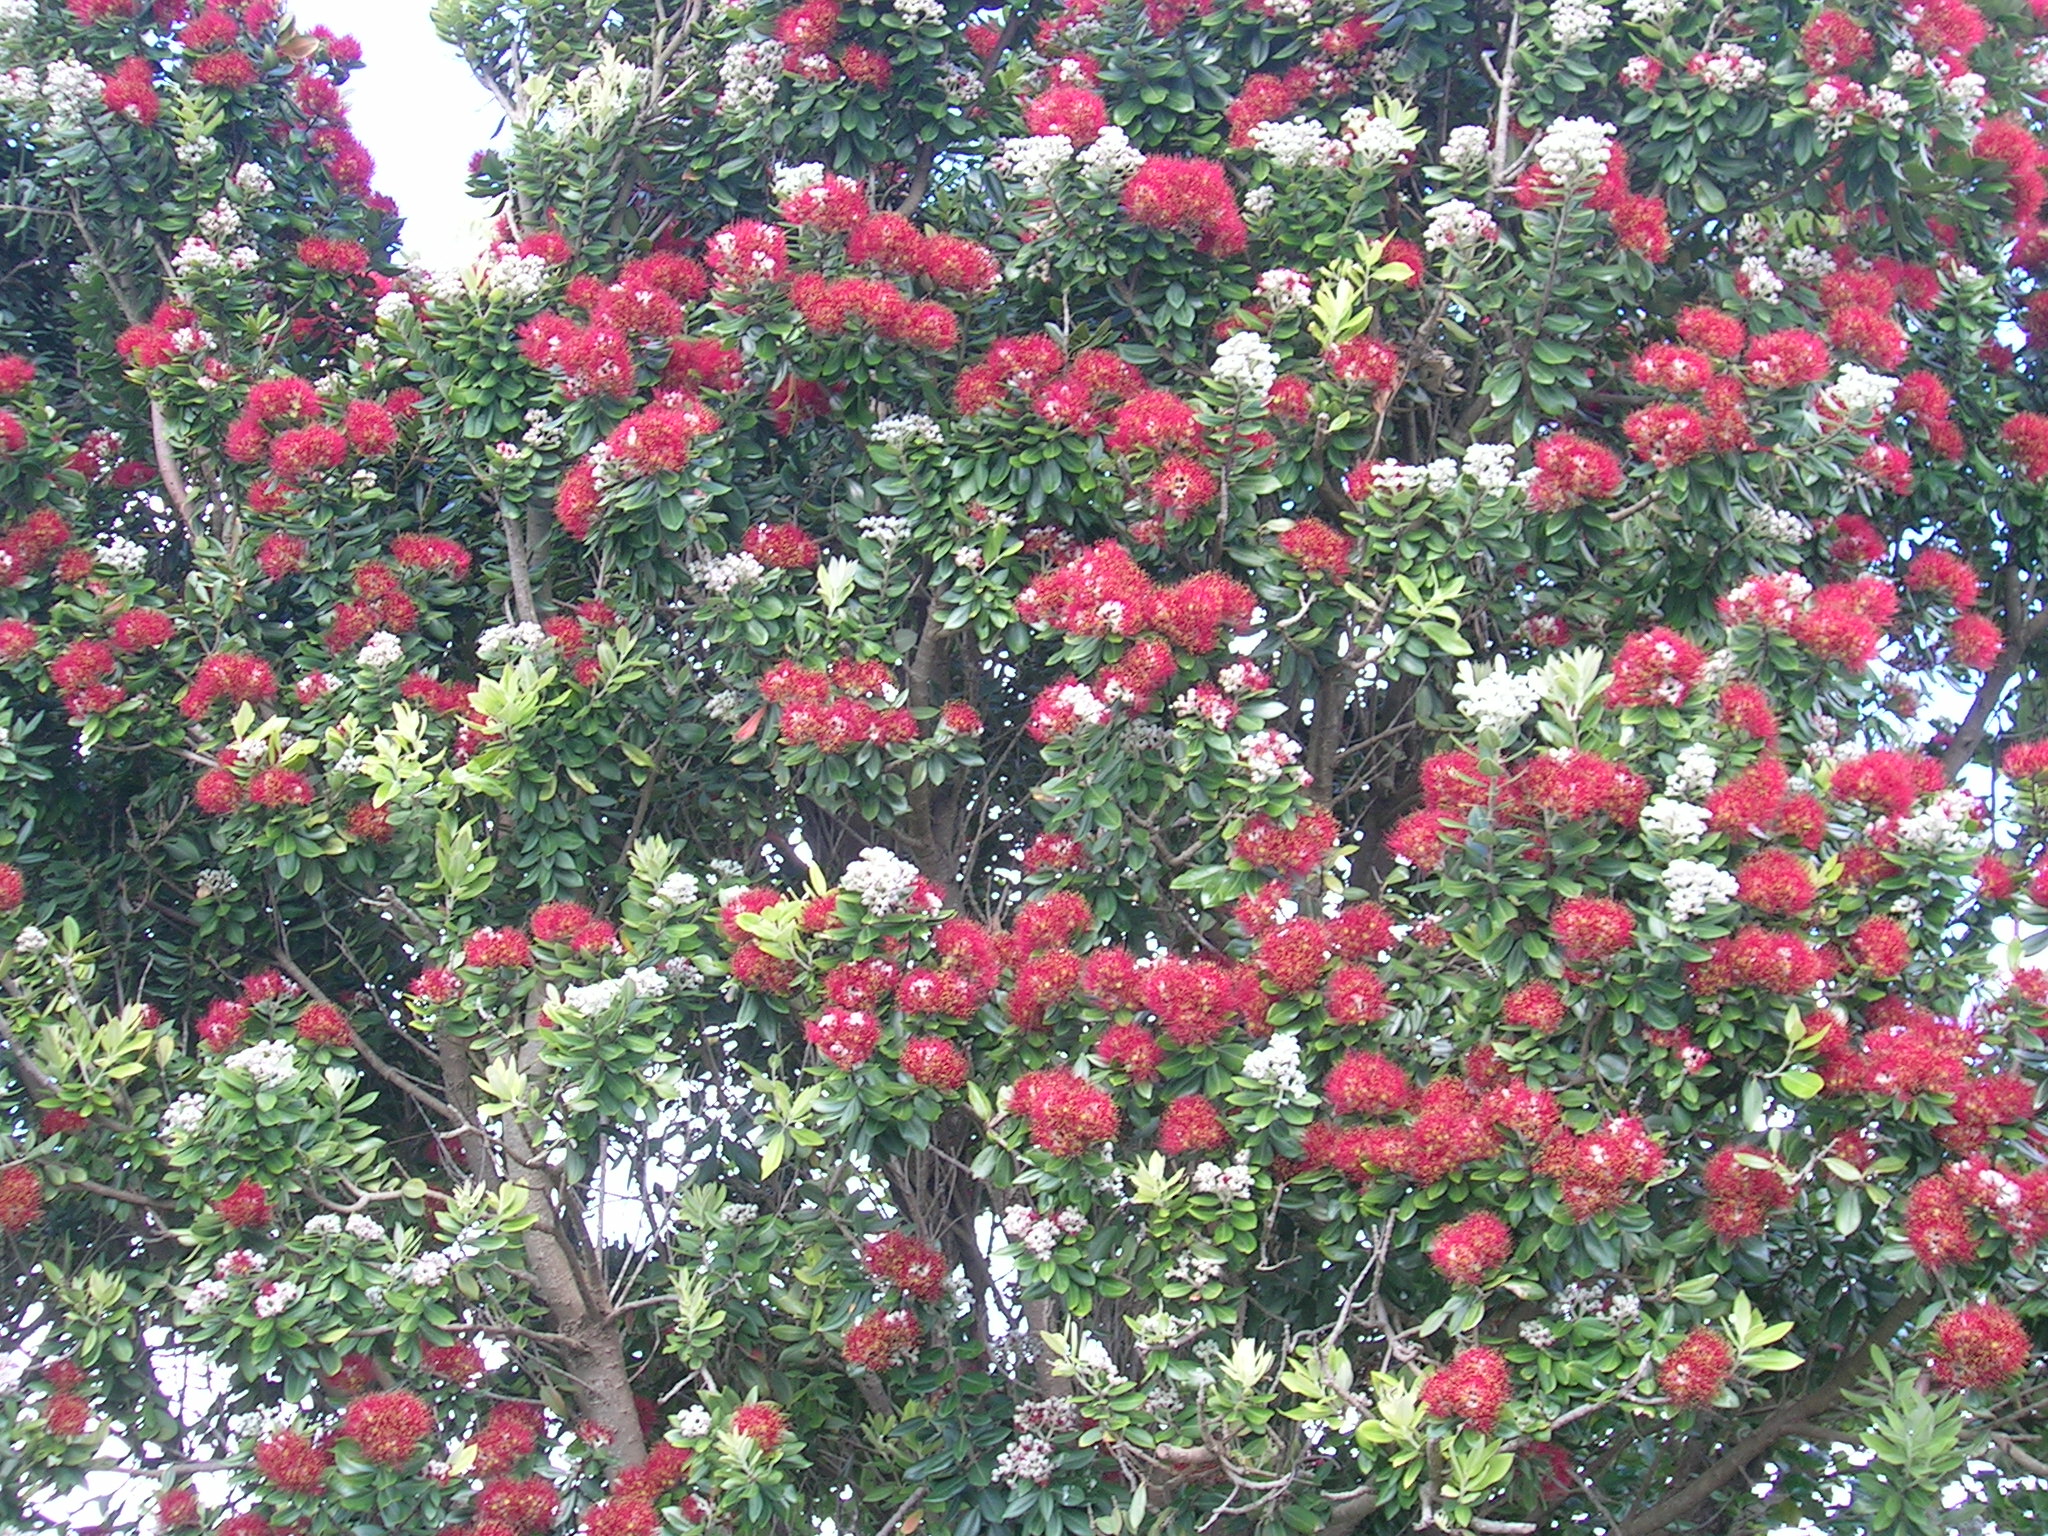 some red and white flowers near some trees